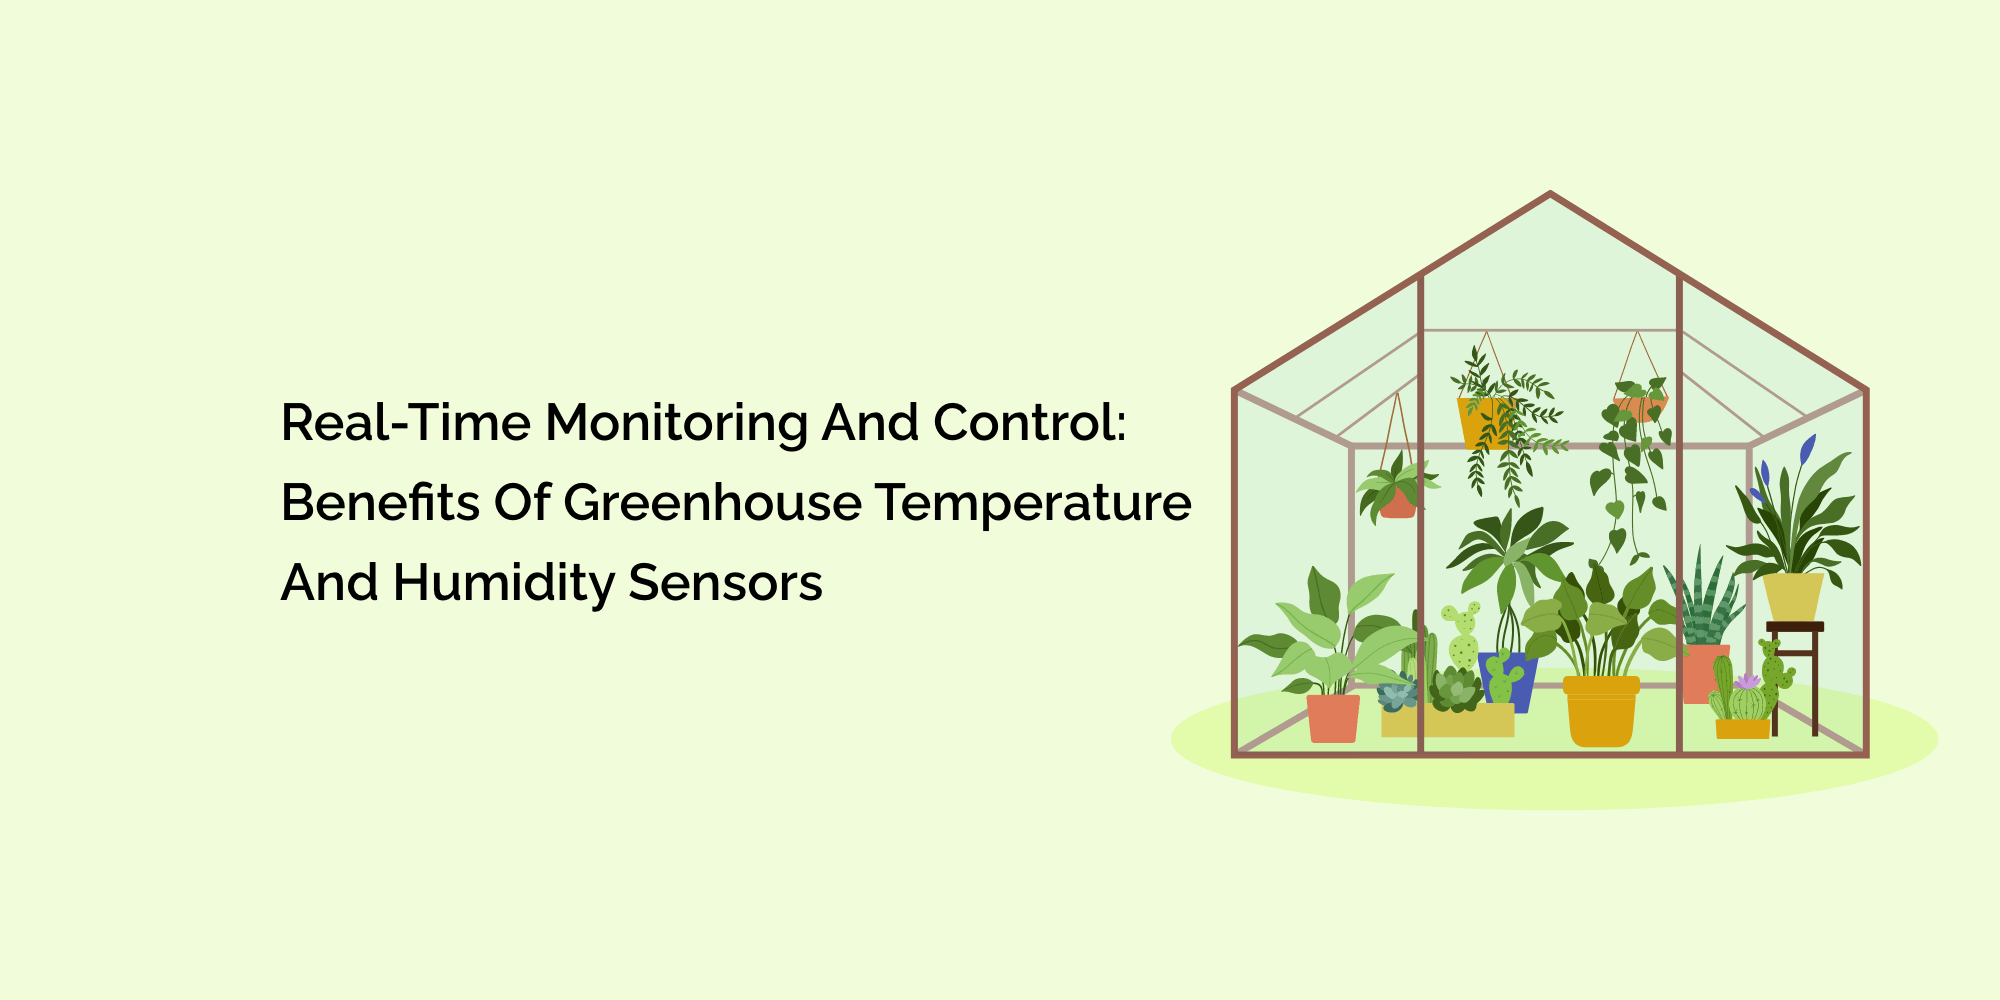 Real-time Monitoring and Control: Benefits of Greenhouse Temperature and Humidity Sensors